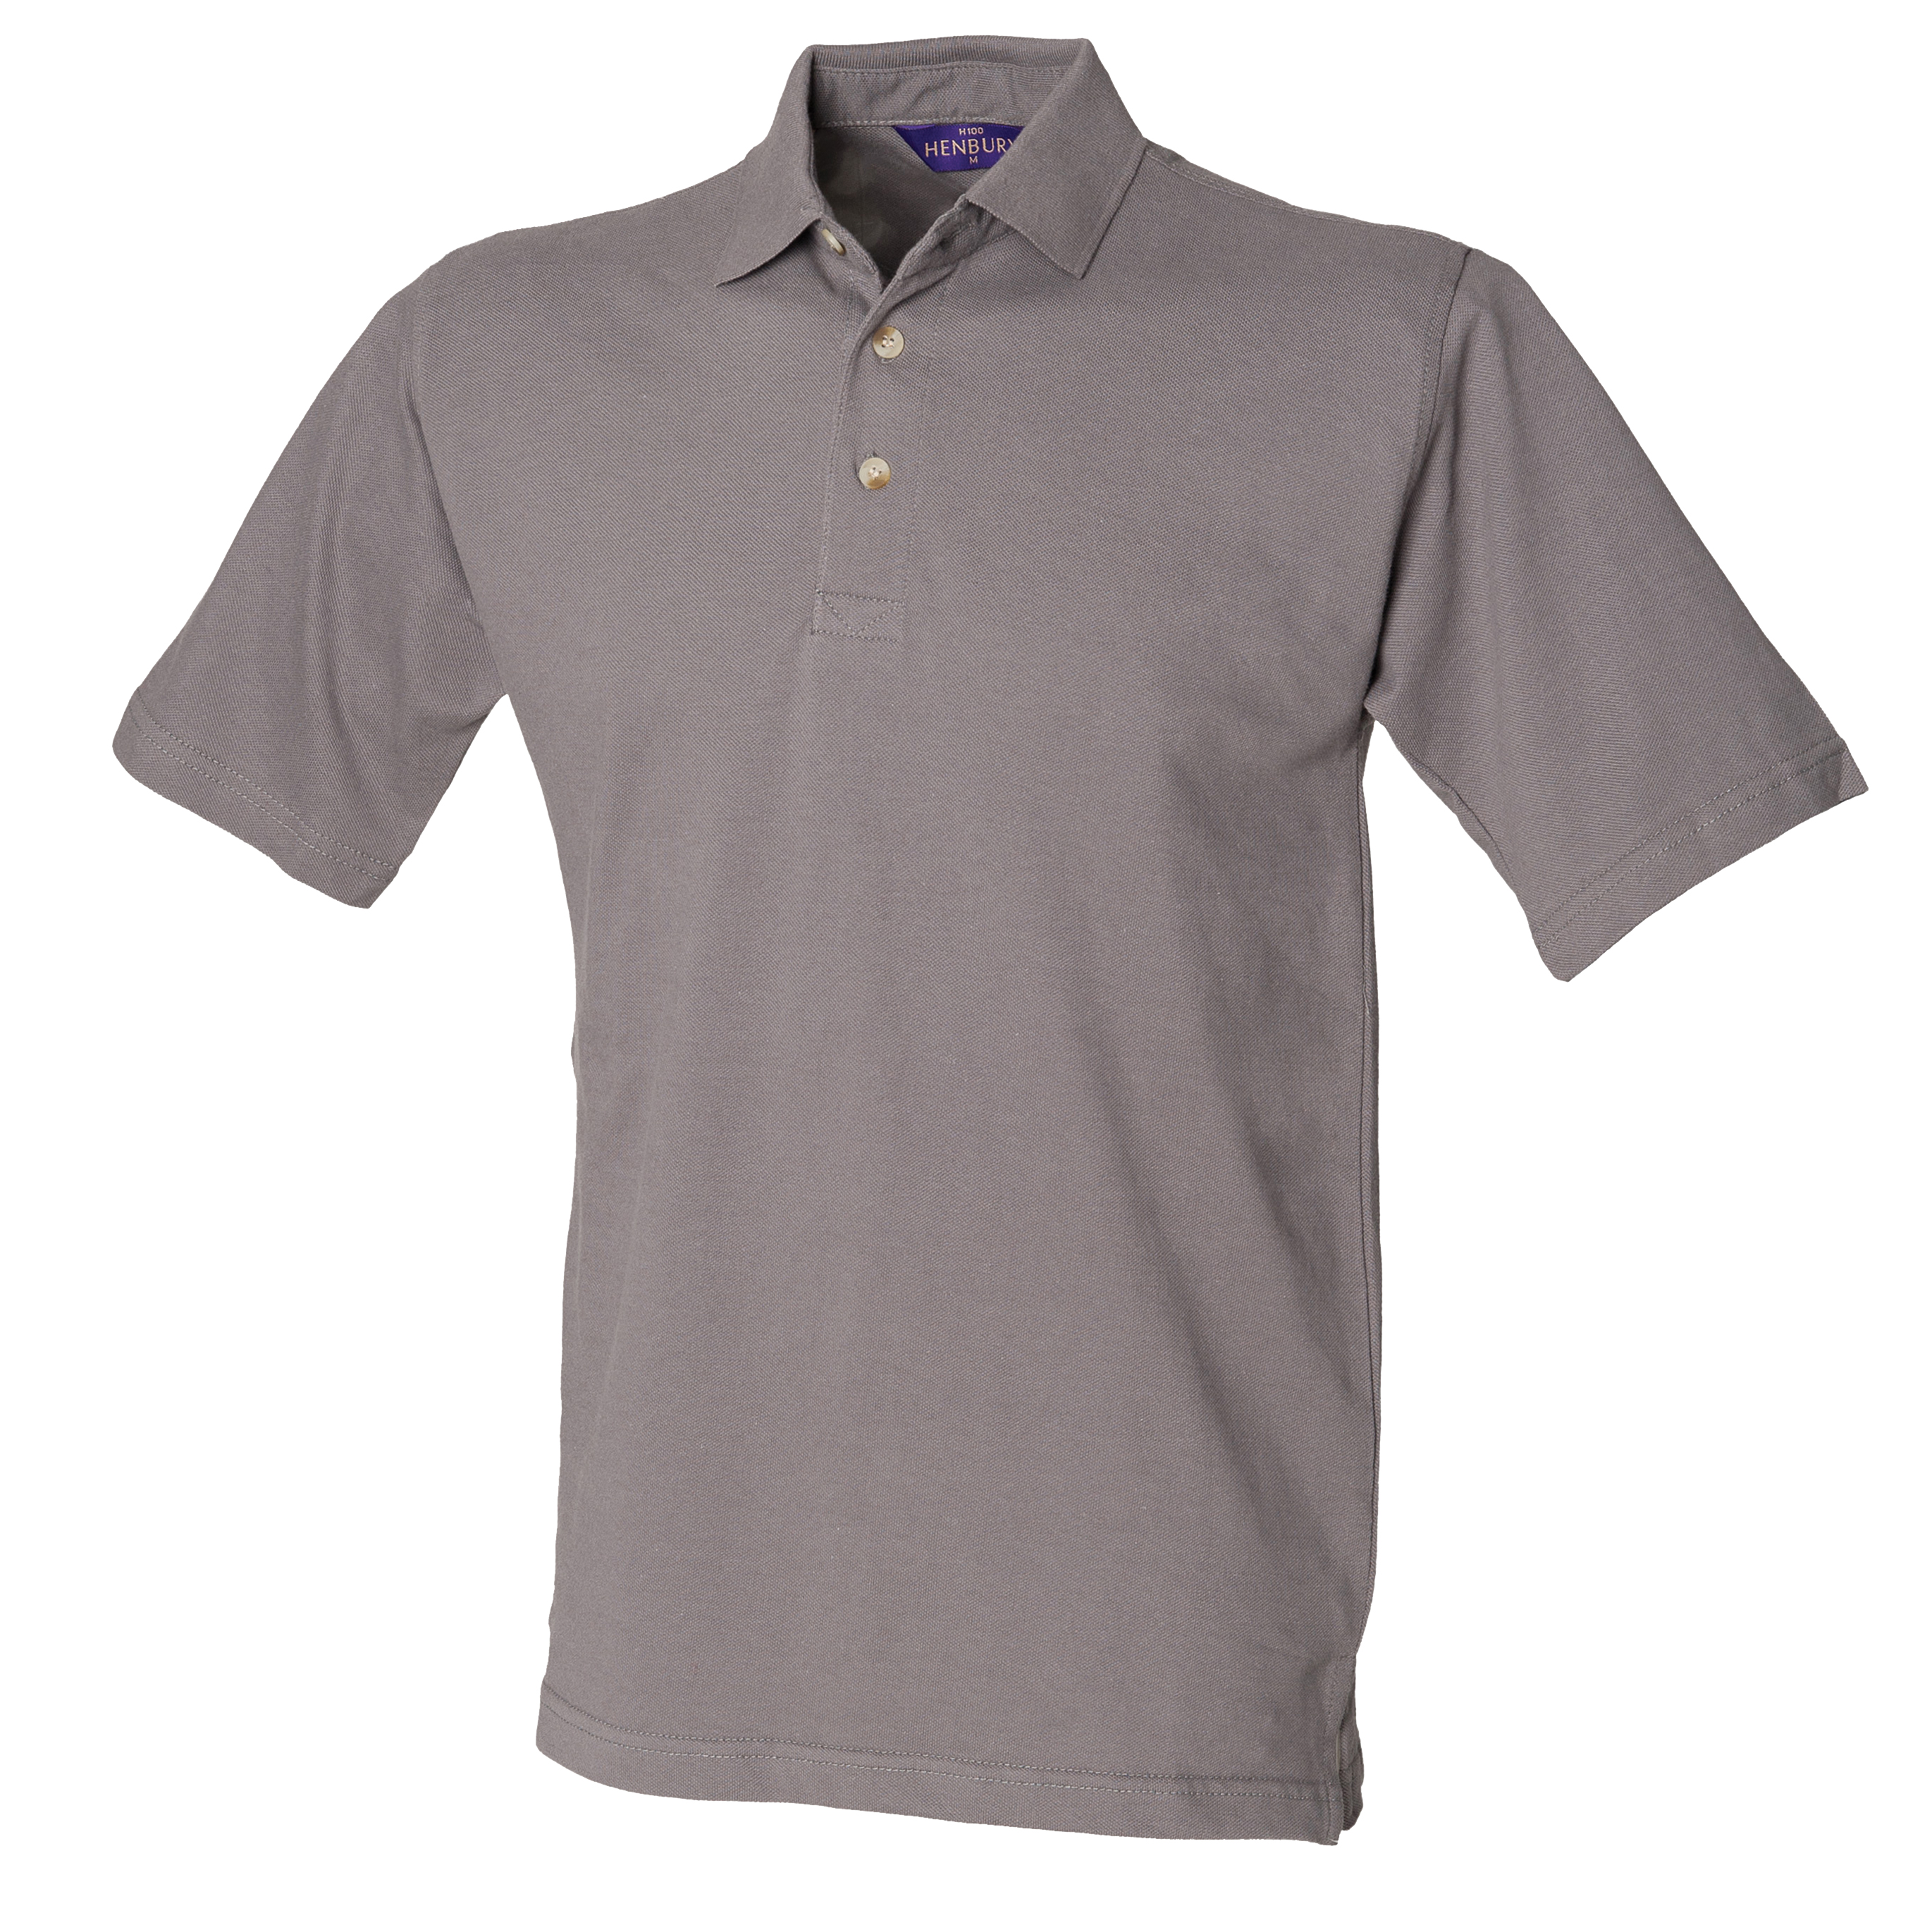 ax-httpswebsystems.s3.amazonaws.comtmp_for_downloadhenbury-classic-cotton-pique-polo-stand-up-slate-grey.jpg